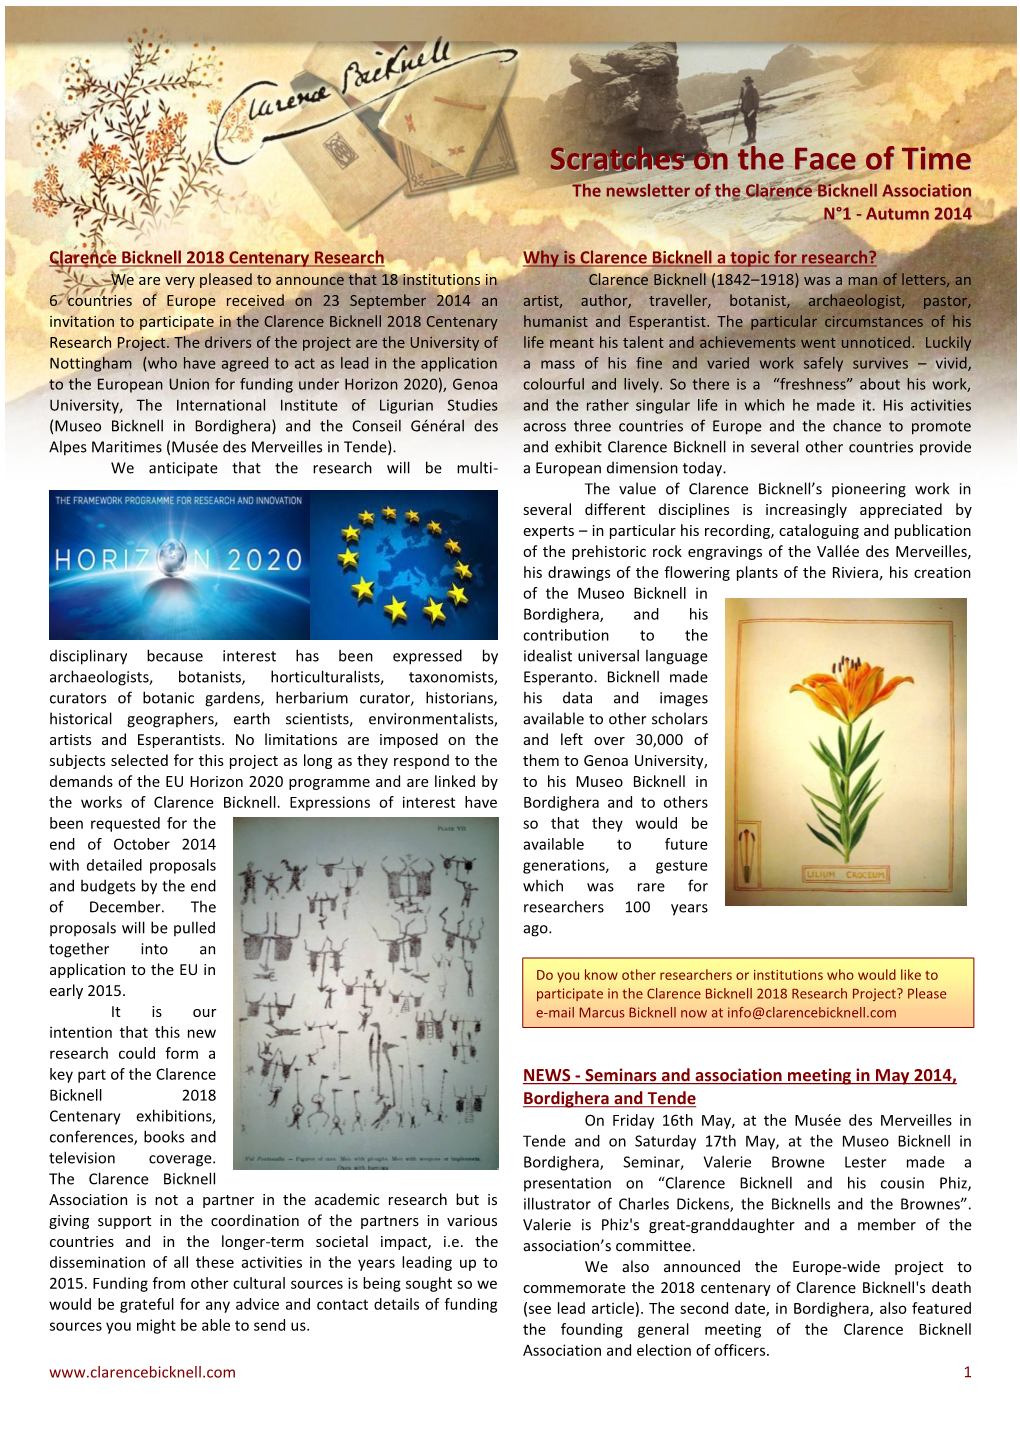 Scratches on the Face of Time the Newsletter of the Clarence Bicknell Association N°1 - Autumn 2014